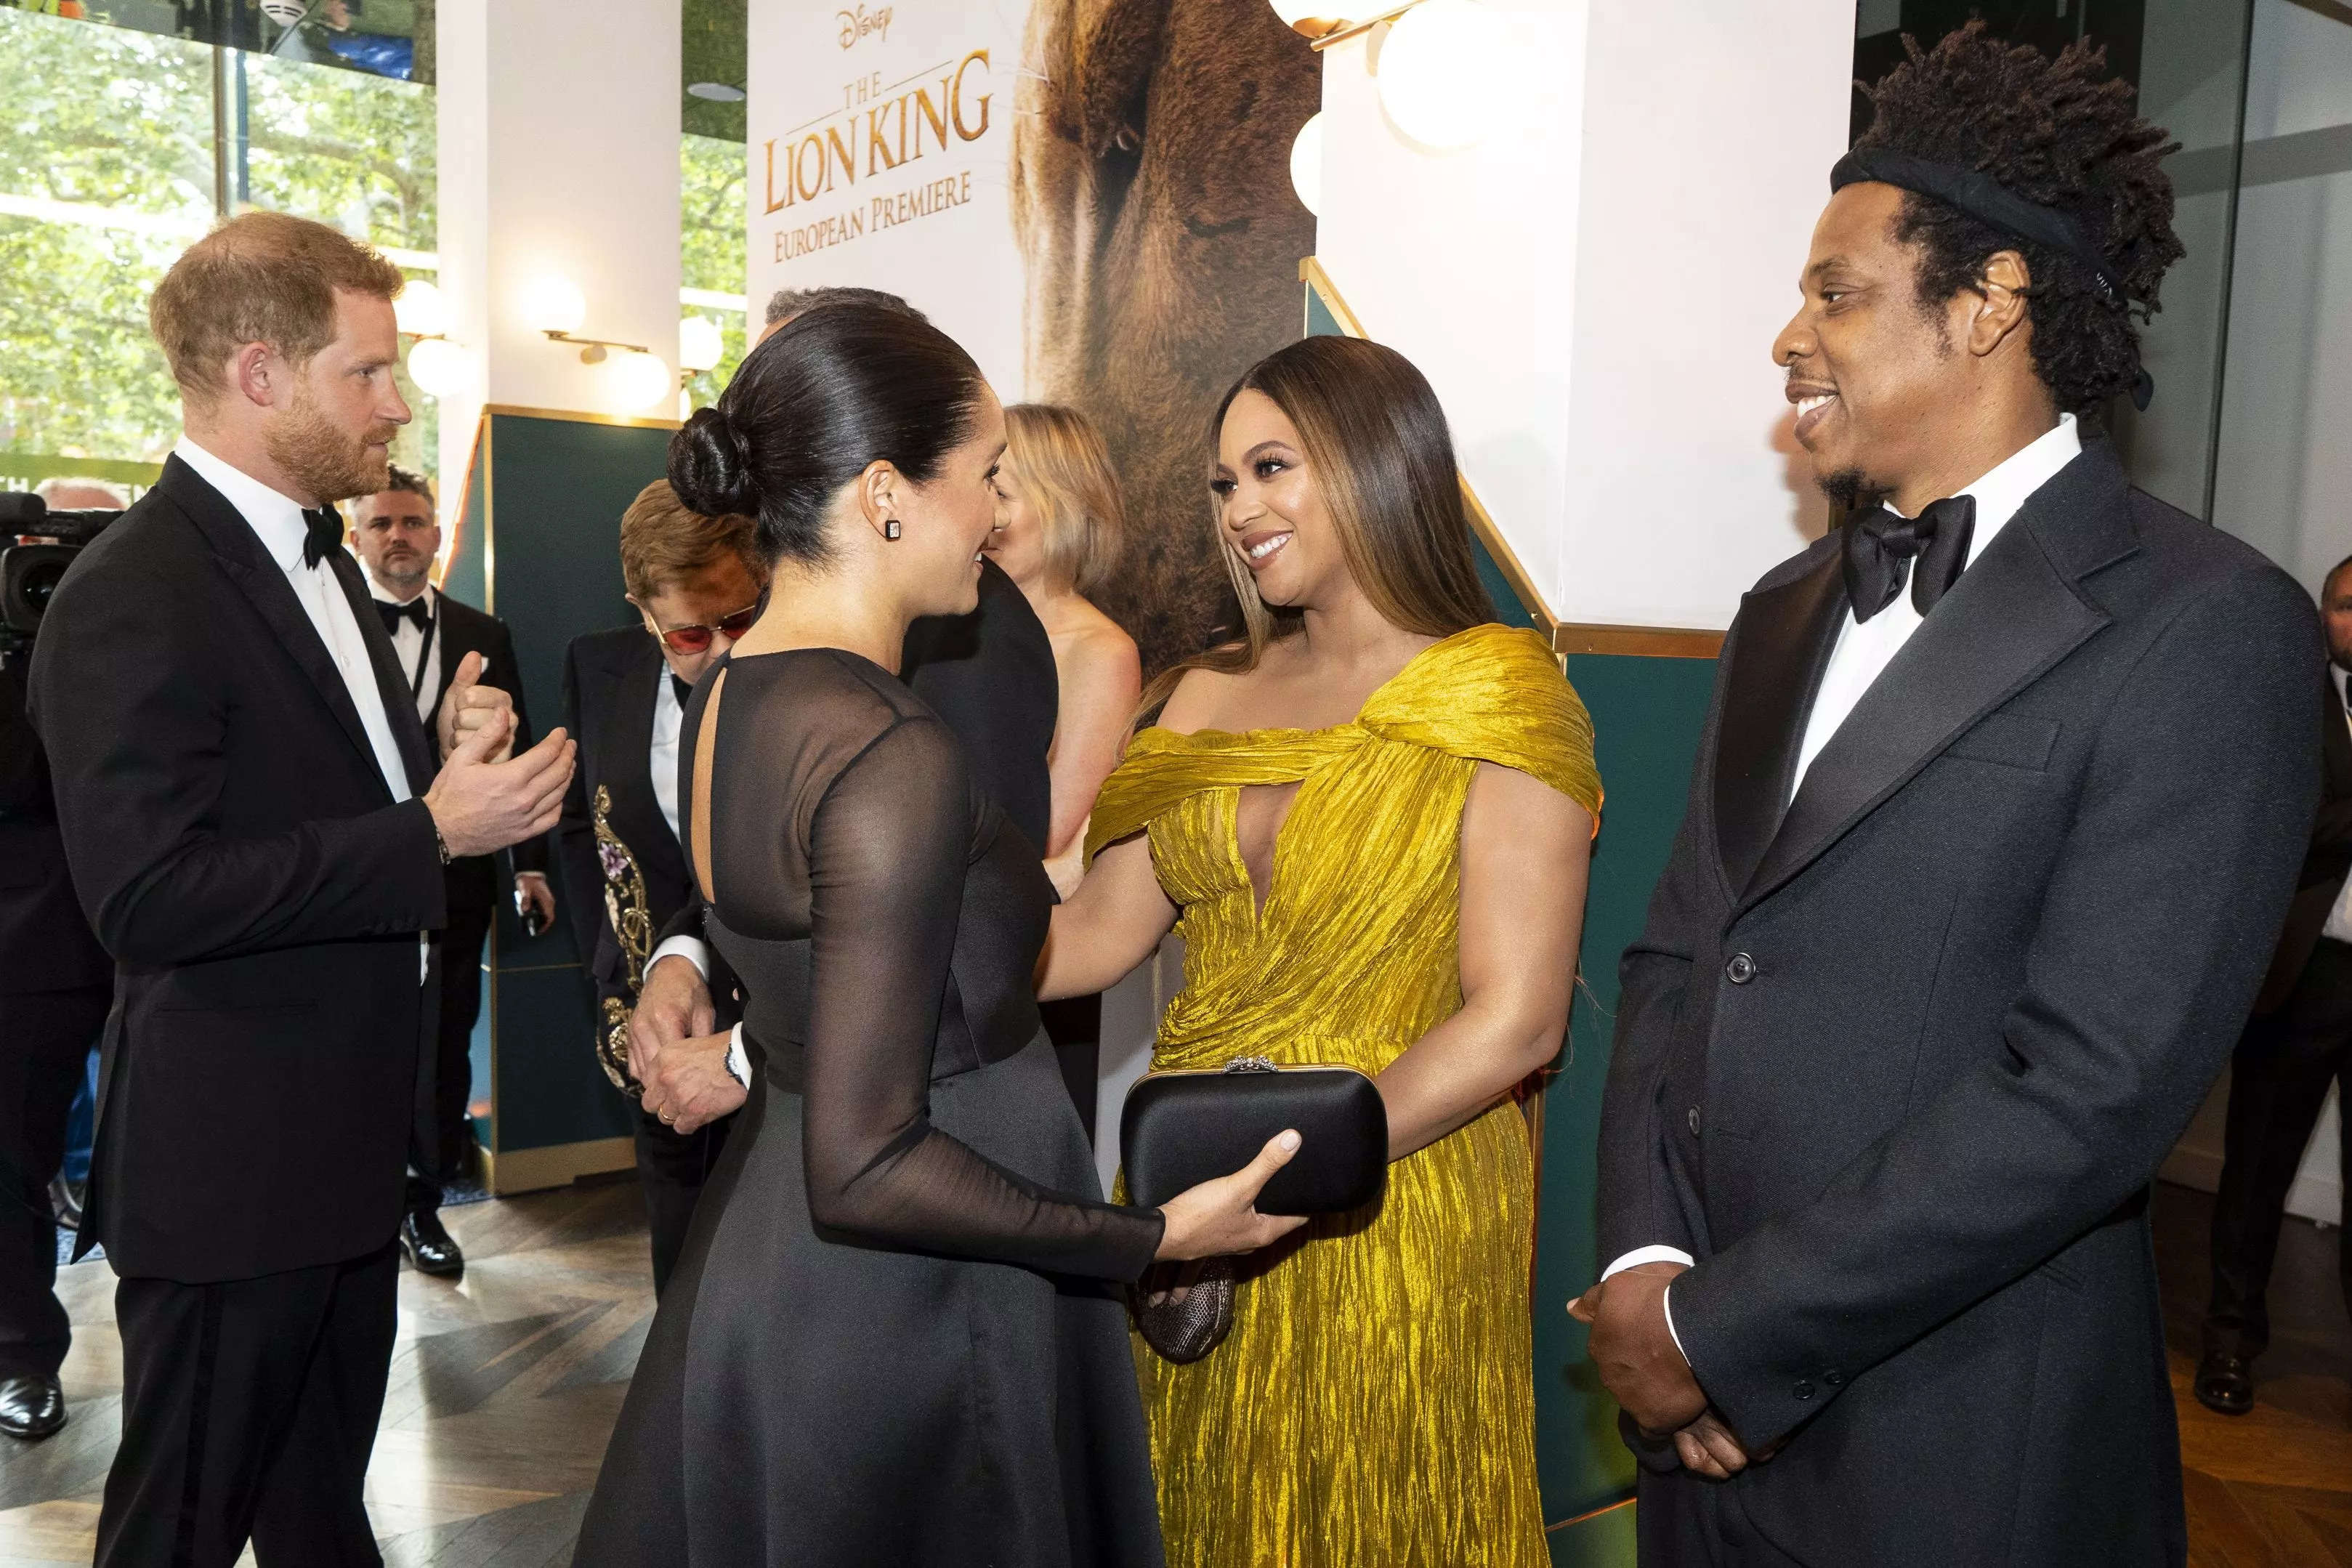 Beyoncé and Jay-Z meet and talk with Prince Harry and Meghan Markle at the premiere of "The Lion King."